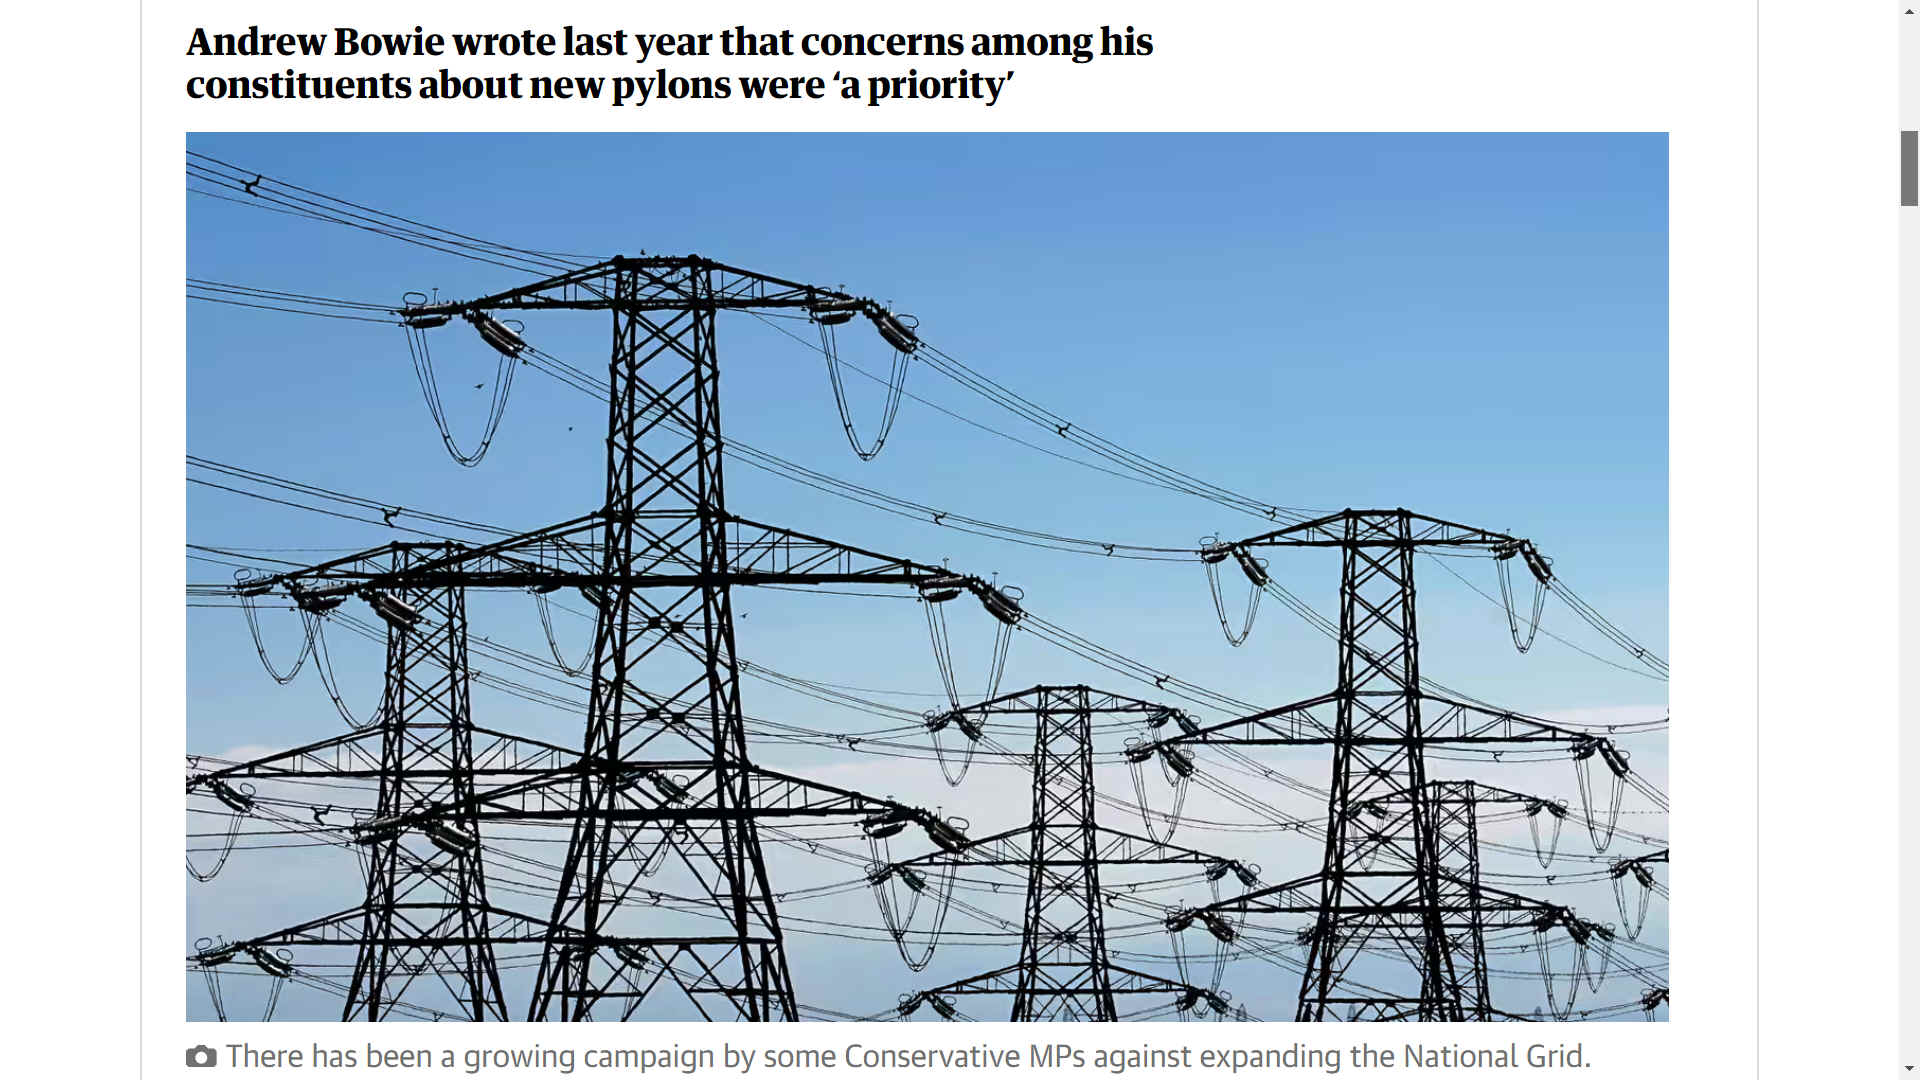 There has been a growing campaign by some Conservative MPs against expanding the National Grid, which needs to happen if enough electricity is to be supplied to UK homes and businesses while allowing for growth and decarbonisation. The MPs say pylons are unsightly. The Offshore Electricity Grid Task Force is made up of 14 MPs who are campaigning against pylons. Its members include the former secretaries of state Priti Patel, Kemi Badenoch and Thrse Coffey. Patel brought their case to parliament in November, asking why the pylons could not be built in the sea. She demanded that ministers opt to build an offshore grid and pull the plug on these awful pylons. The energy secretary, Claire Coutinho, has said expanding the grid could be a politically thorny topic, commenting last year: Of course, its a difficult conversation when you tell people that things are going to be built near them.